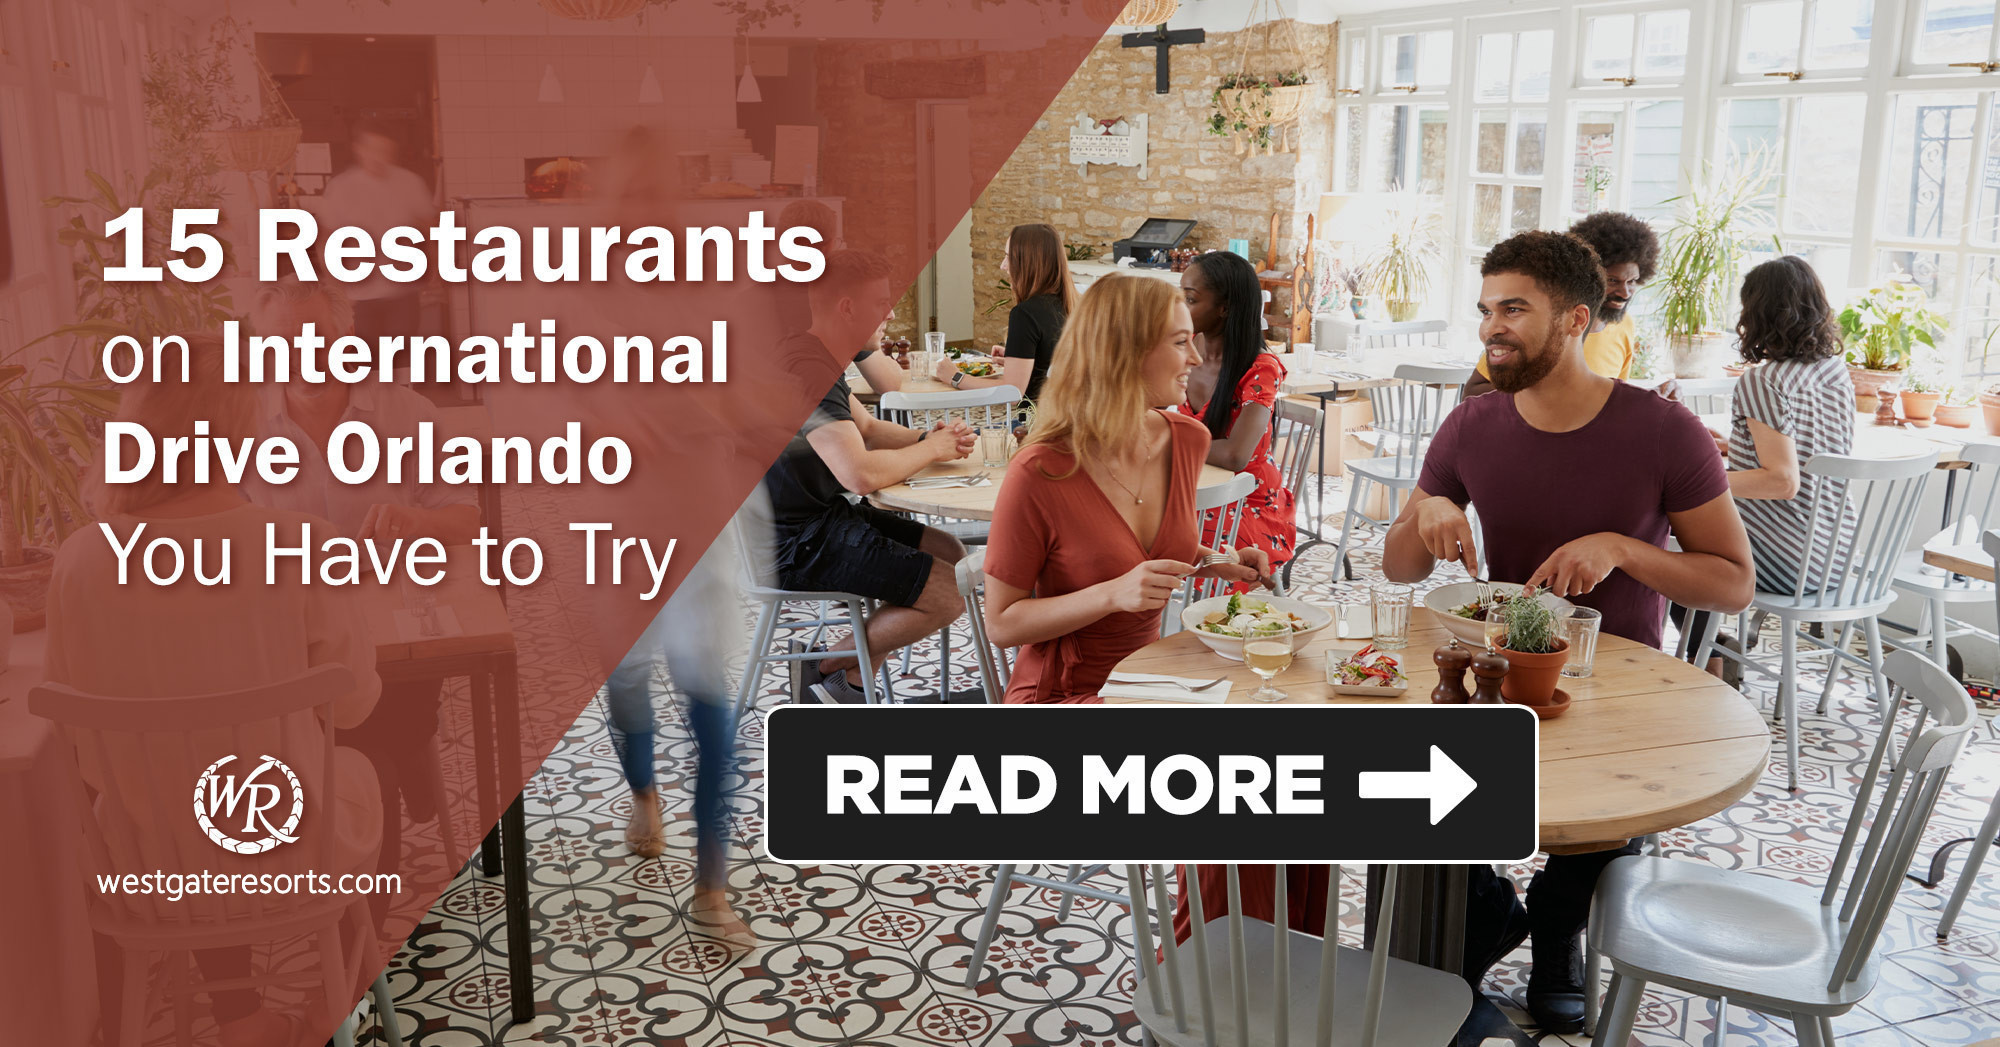 15 Restaurants on International Drive Orlando You Have to Try | I Drive Restaurant Guide